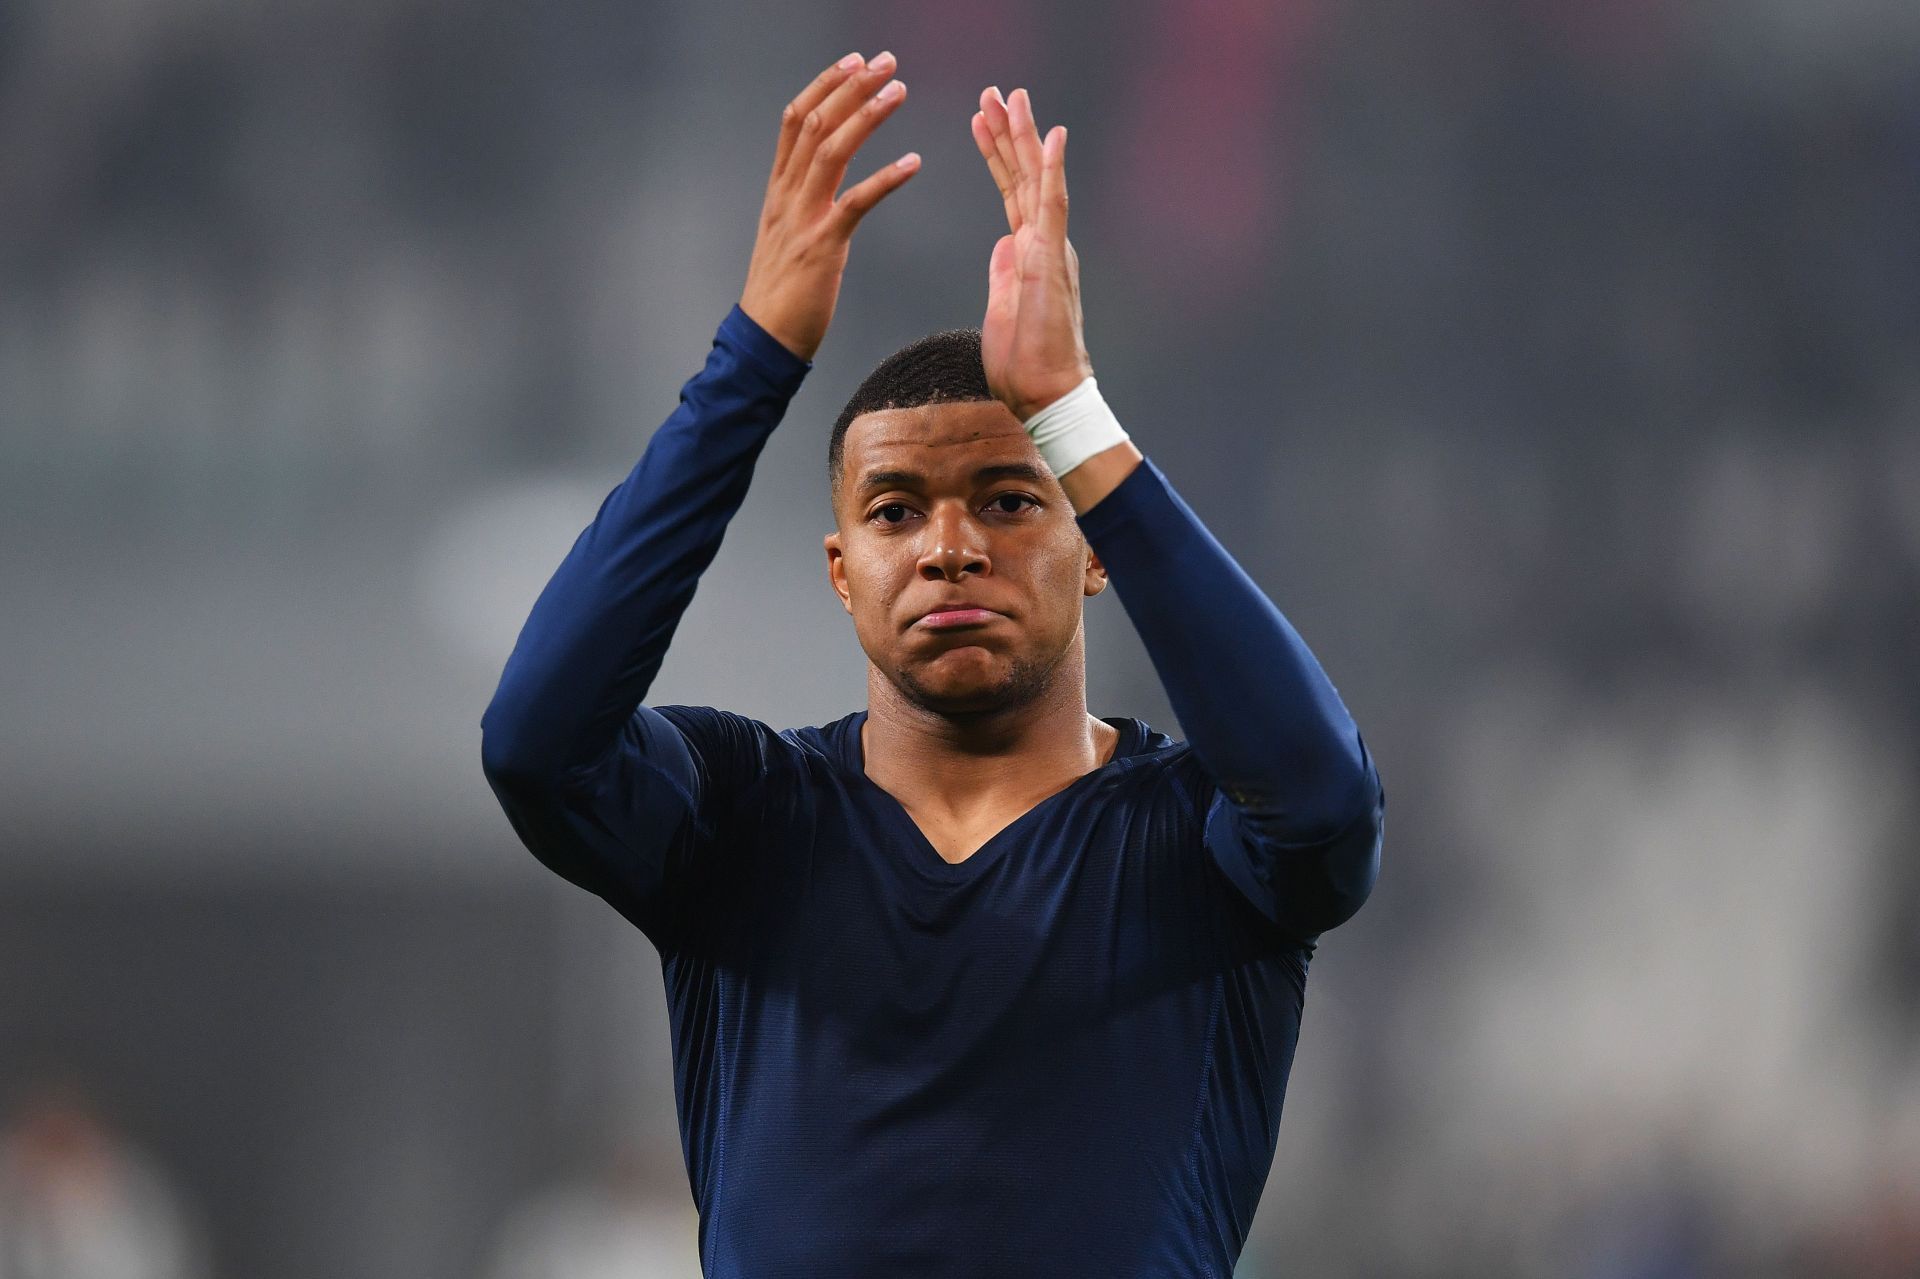 Kylian Mbappe has admirers at Old Trafford.